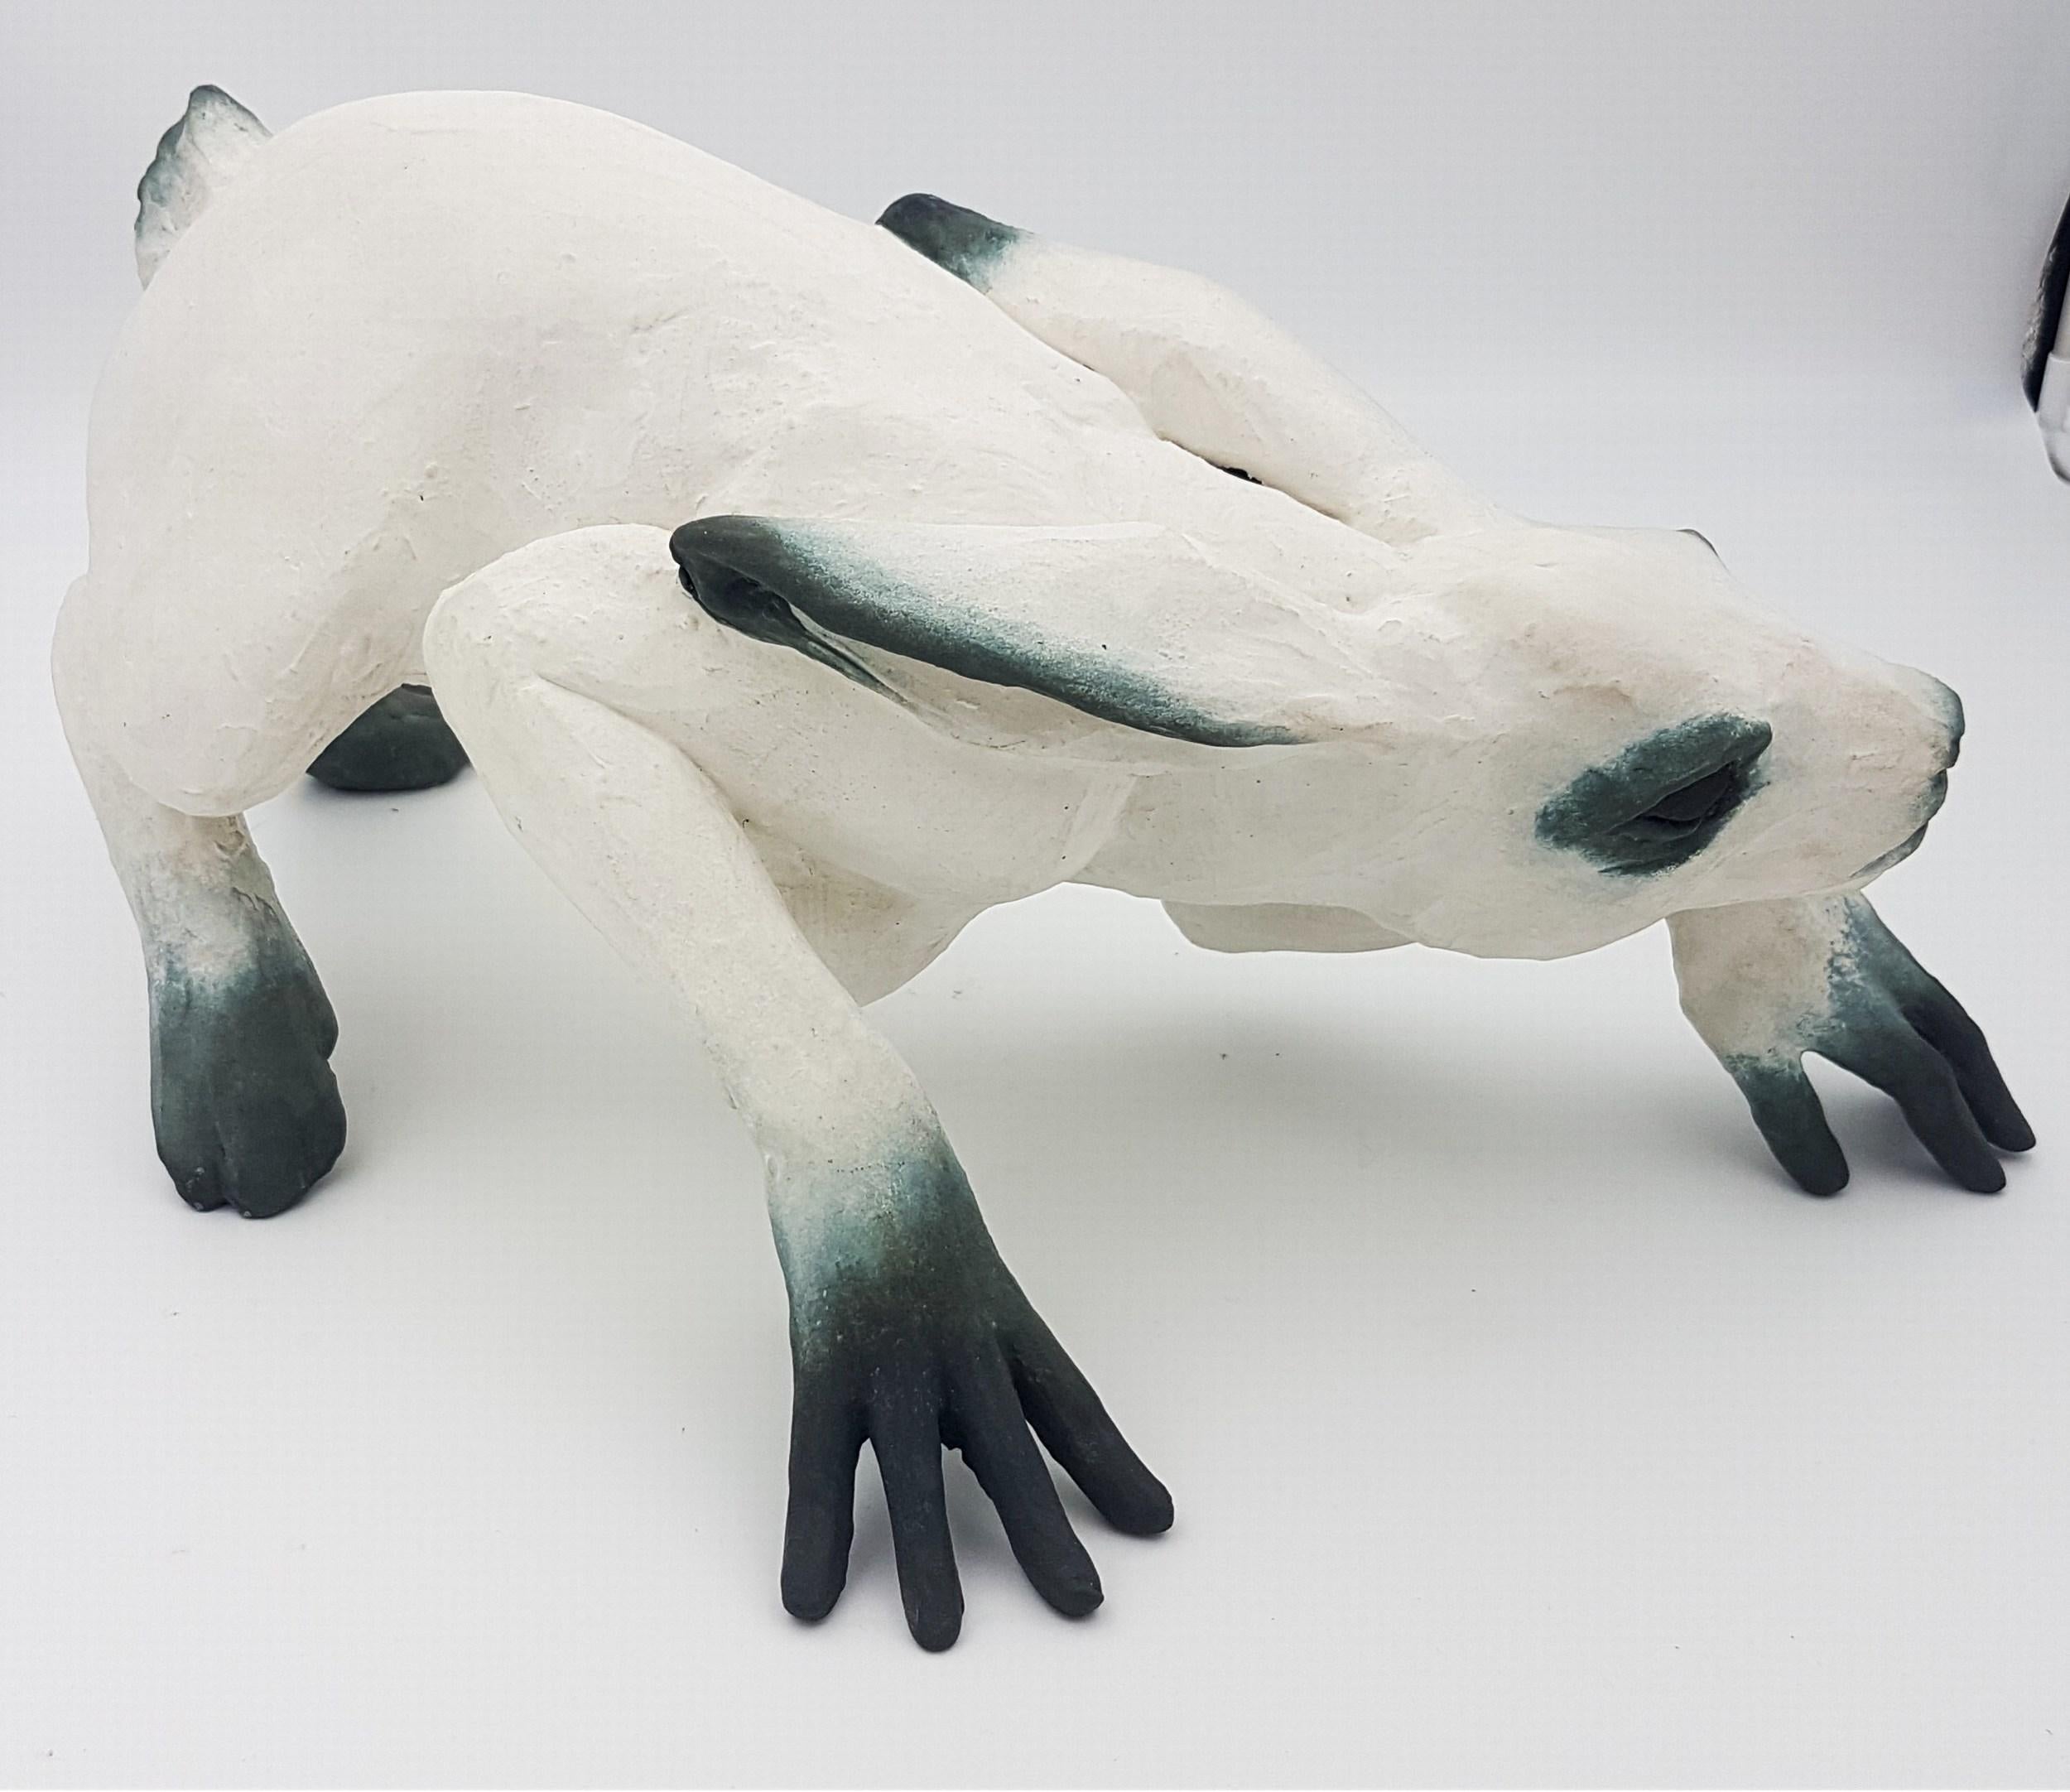 Beth Cavener
Untitled Wolf Pack 
Year: Circa 2006
Hare - Clay and underglaze
Size: 8.5 x 18.25 x 12 in.
Wolves - Hydrocal and paint, 
Size: 13 x 13 x 14 in. (each) 
(pedestals not included)
Provenance - acquired directly from the artist
COA provided